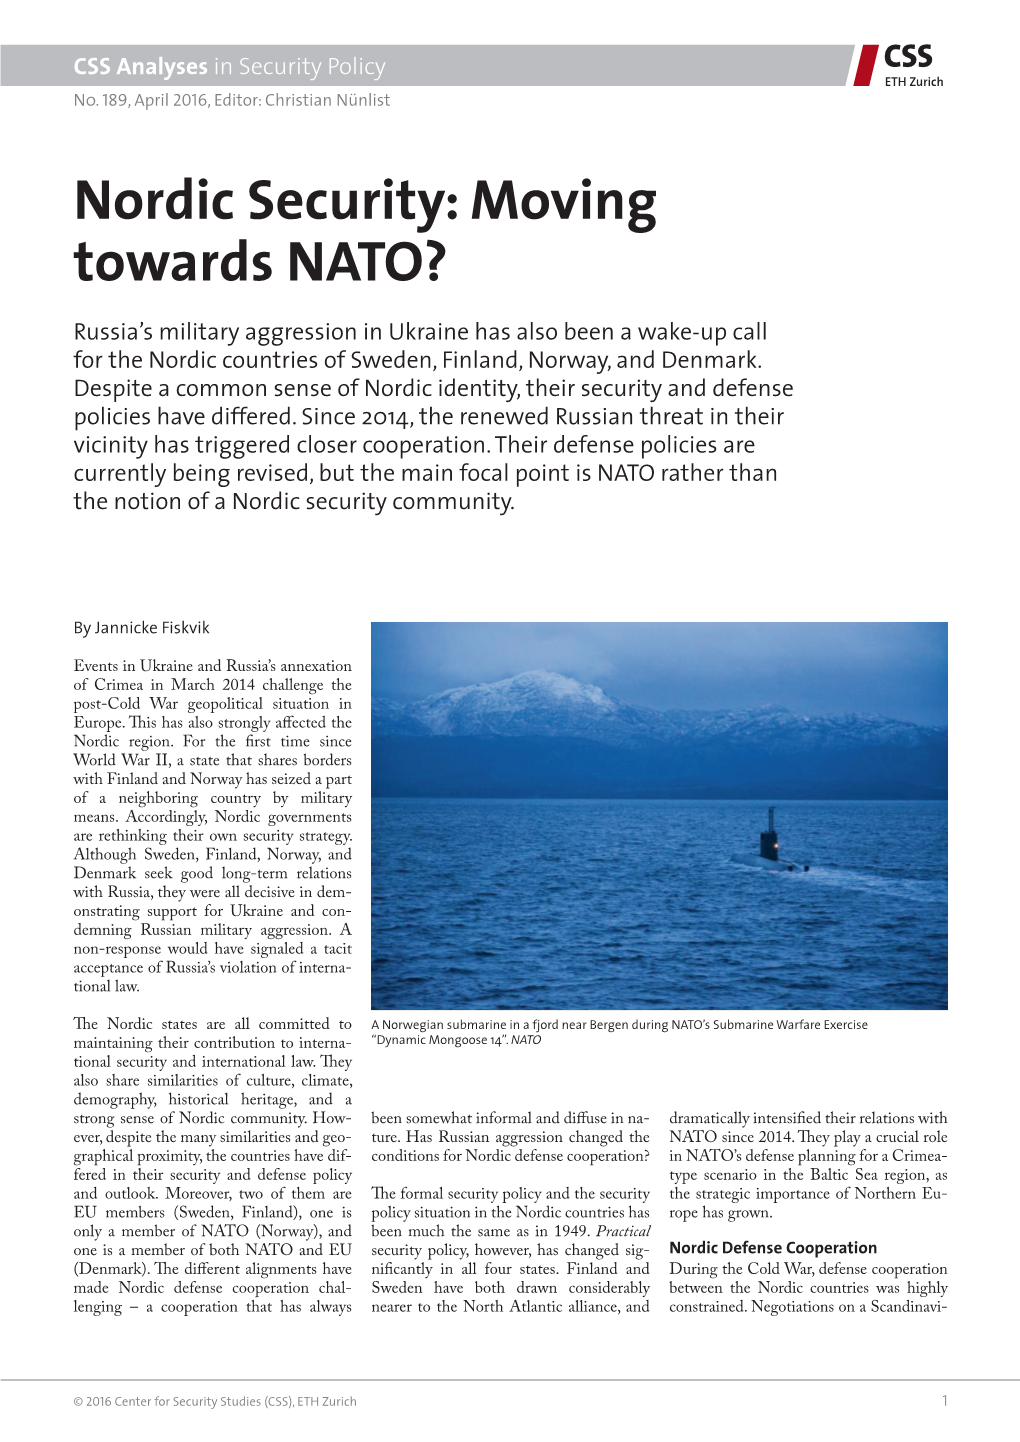 Nordic Security: Moving Towards NATO?